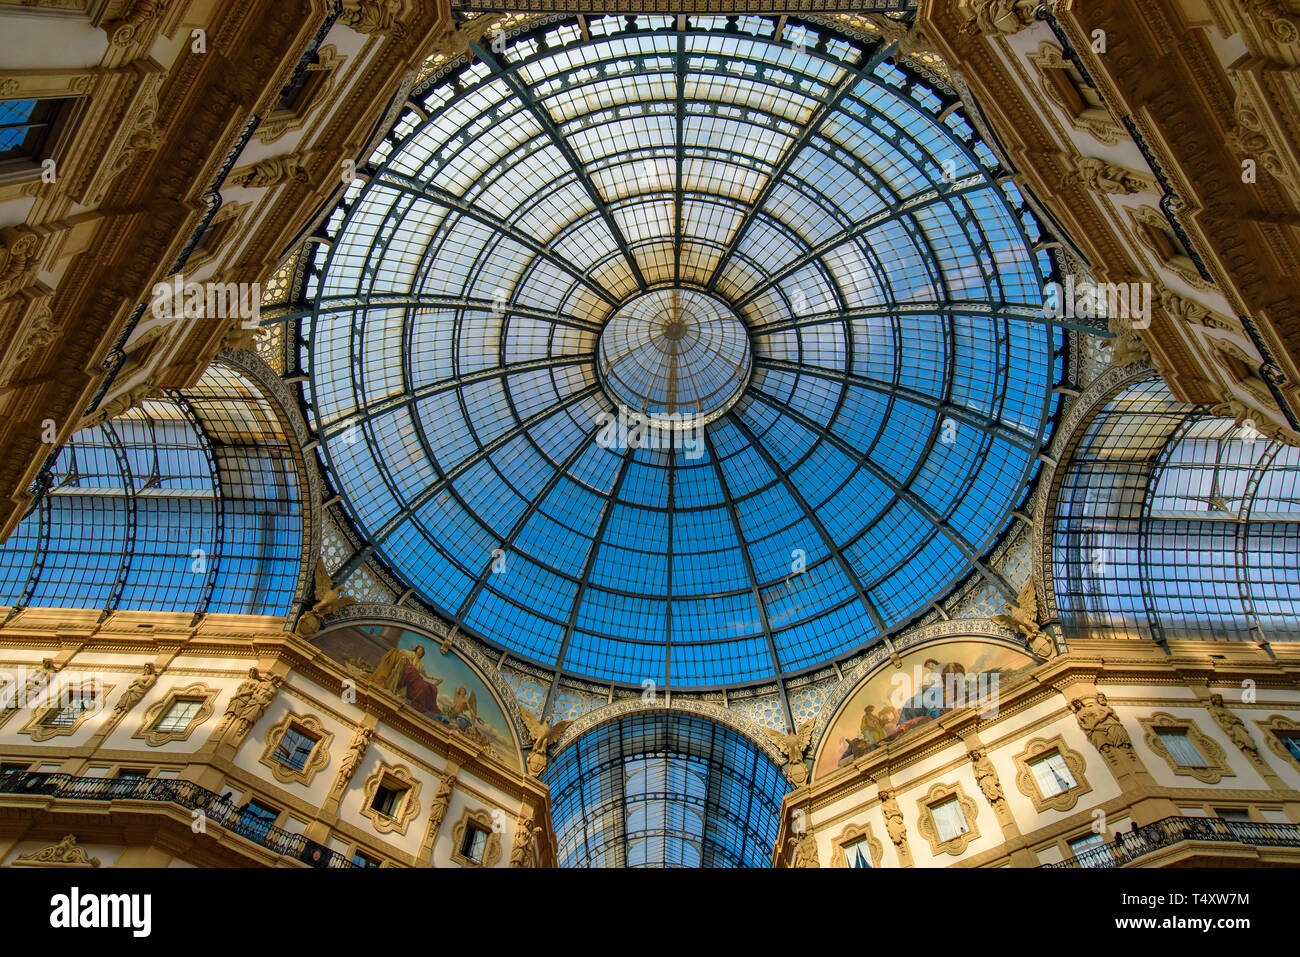 Glass dome of Galleria Vittorio Emanuele II in Milan, Italy's oldest shopping mall Stock Photo